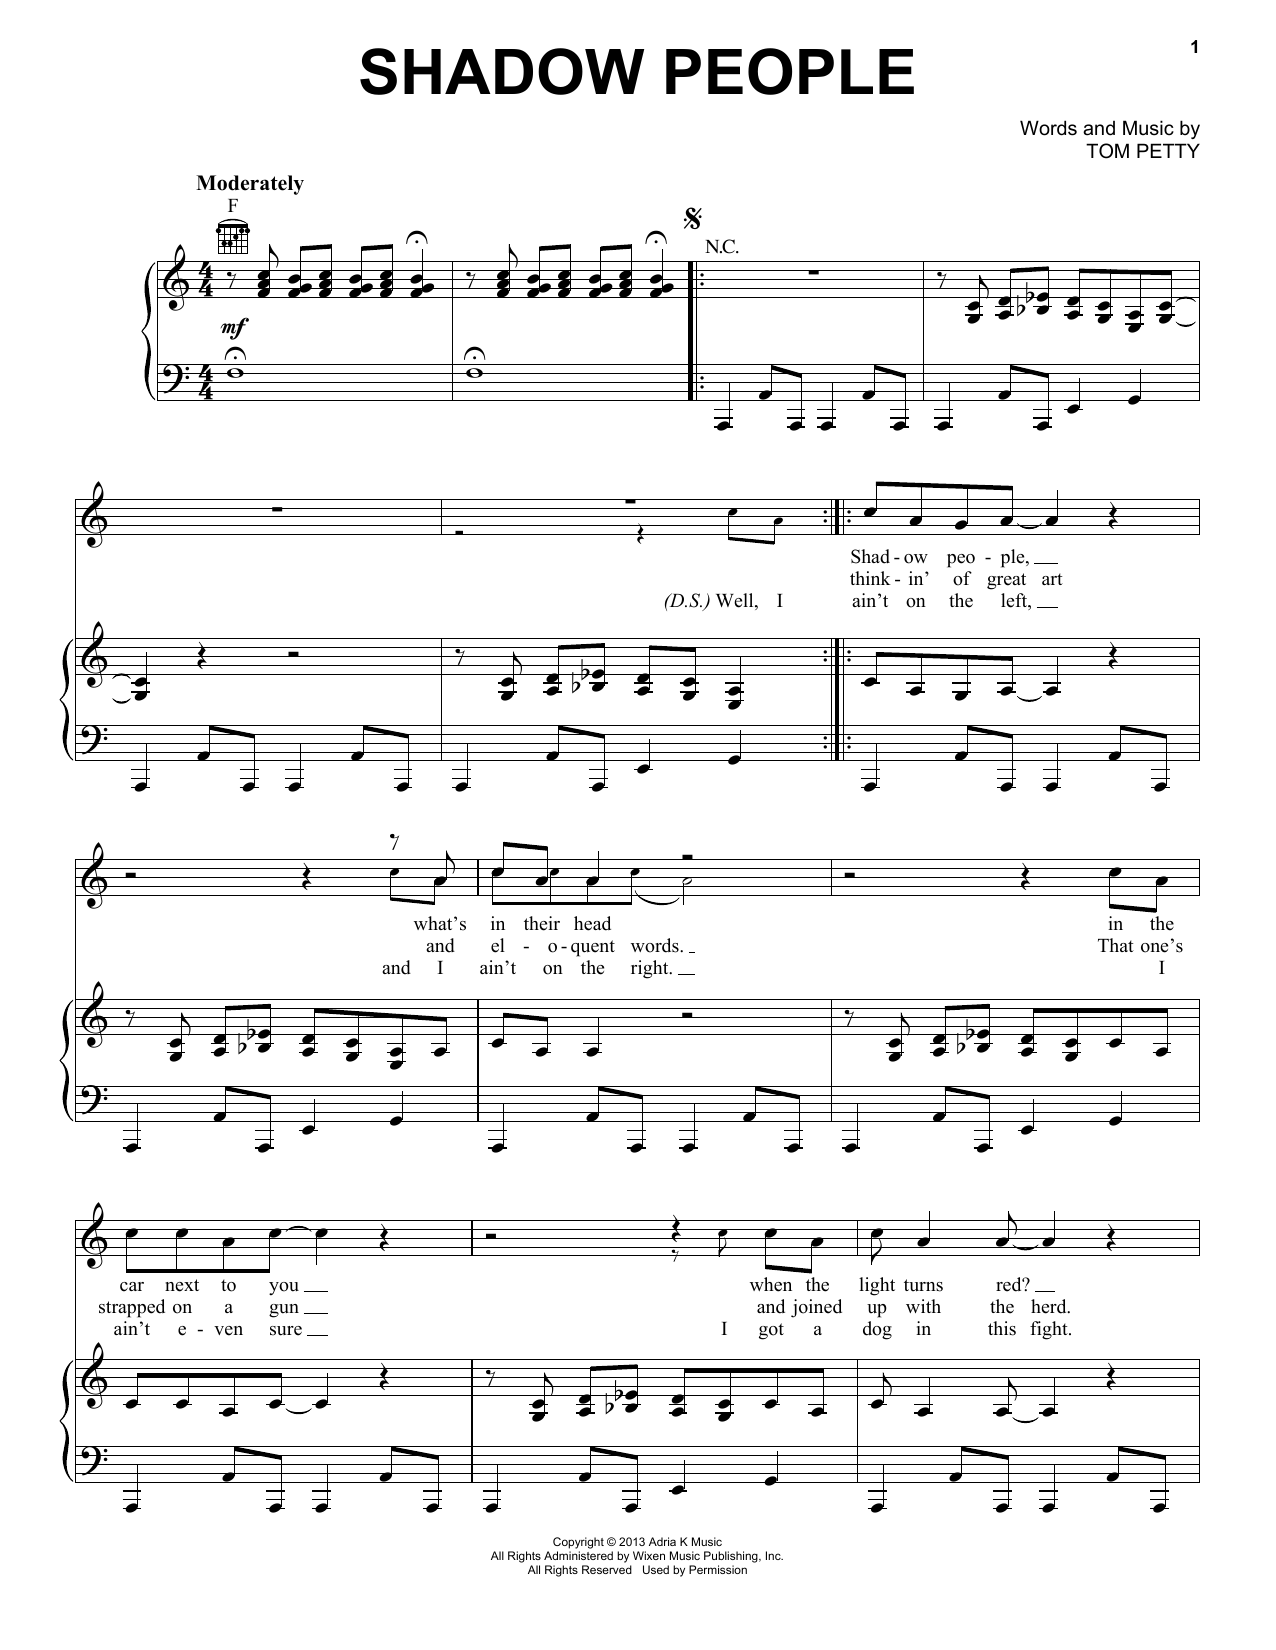 Download Tom Petty & the Heartbreakers Shadow People Sheet Music